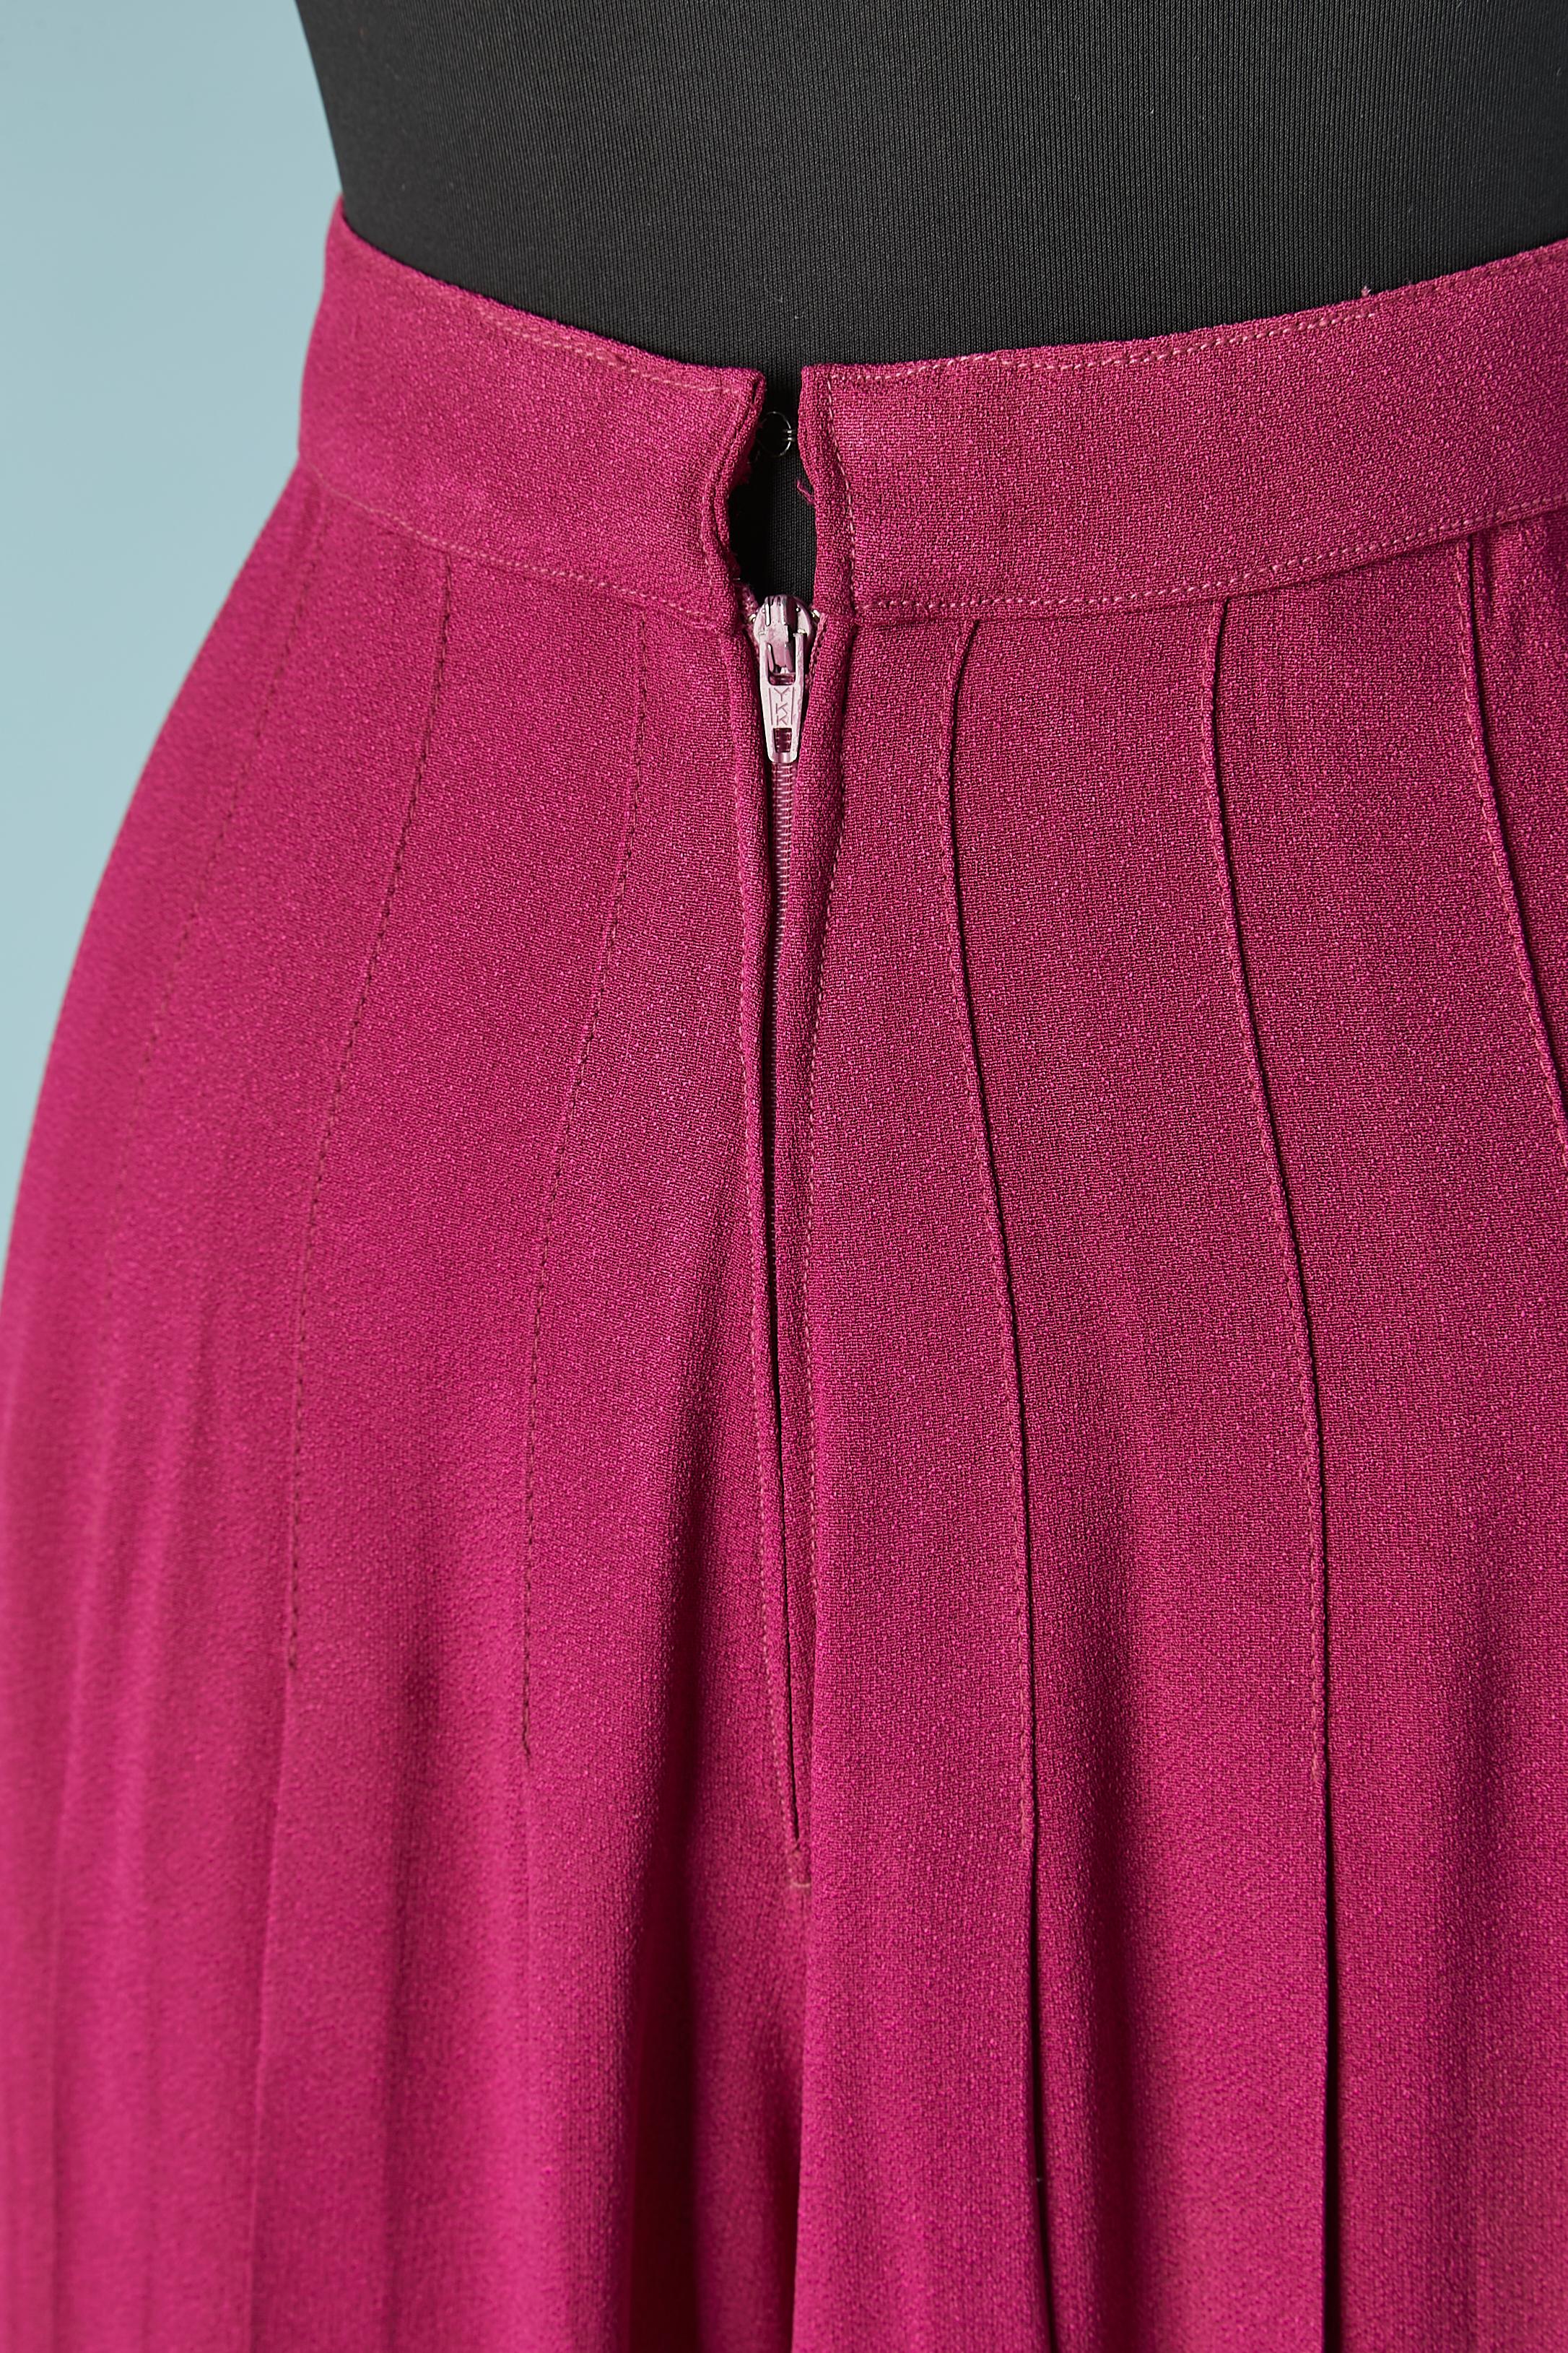 Pleated crepe fushia divided skirt Sonia Rykiel  In Excellent Condition For Sale In Saint-Ouen-Sur-Seine, FR